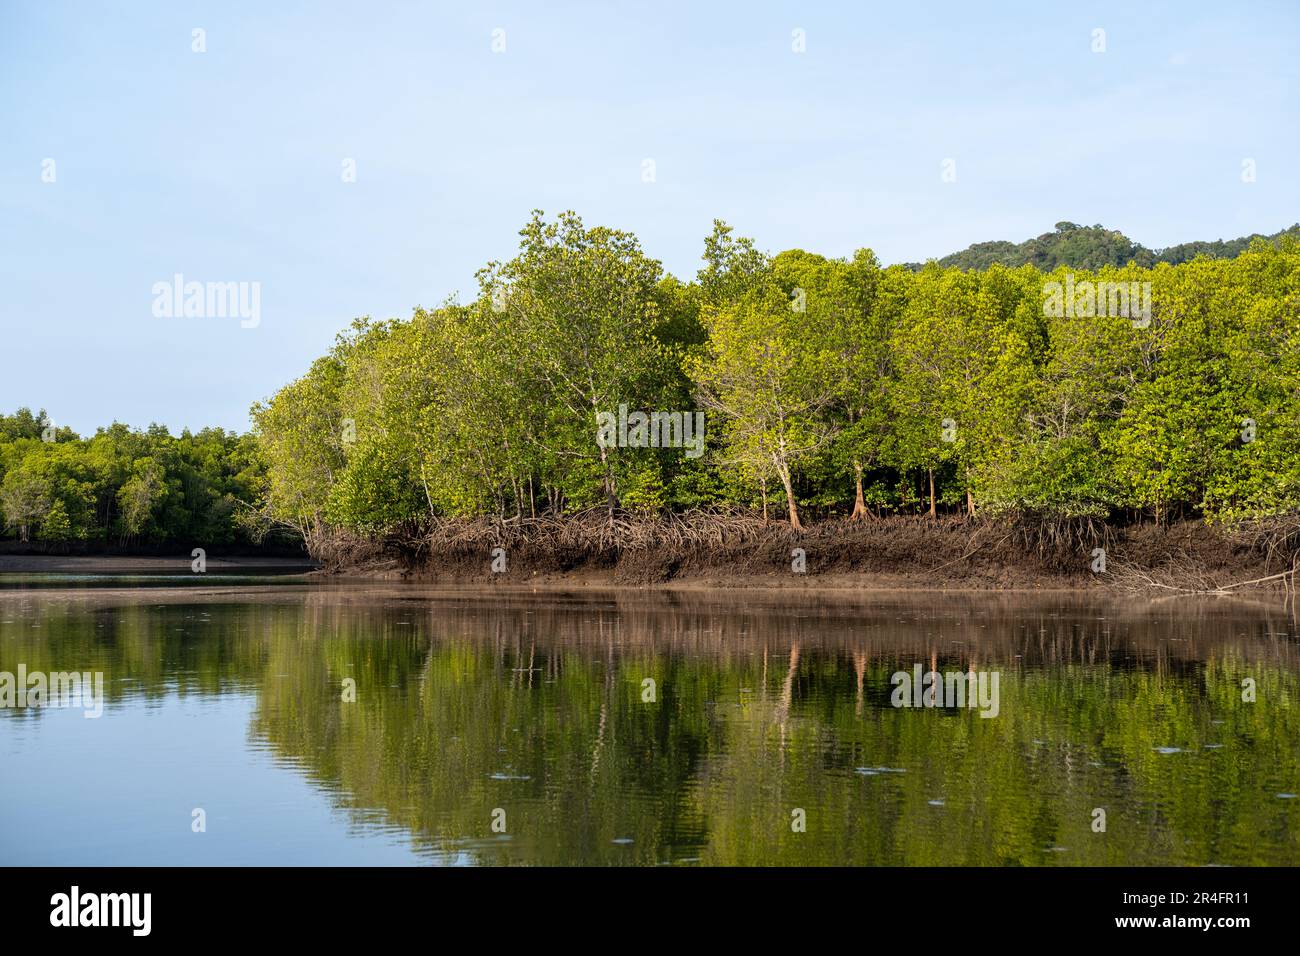 Mangrove forest, including trees and shrubs that grow in saline coastal habitats in the tropics and subtropics Stock Photo